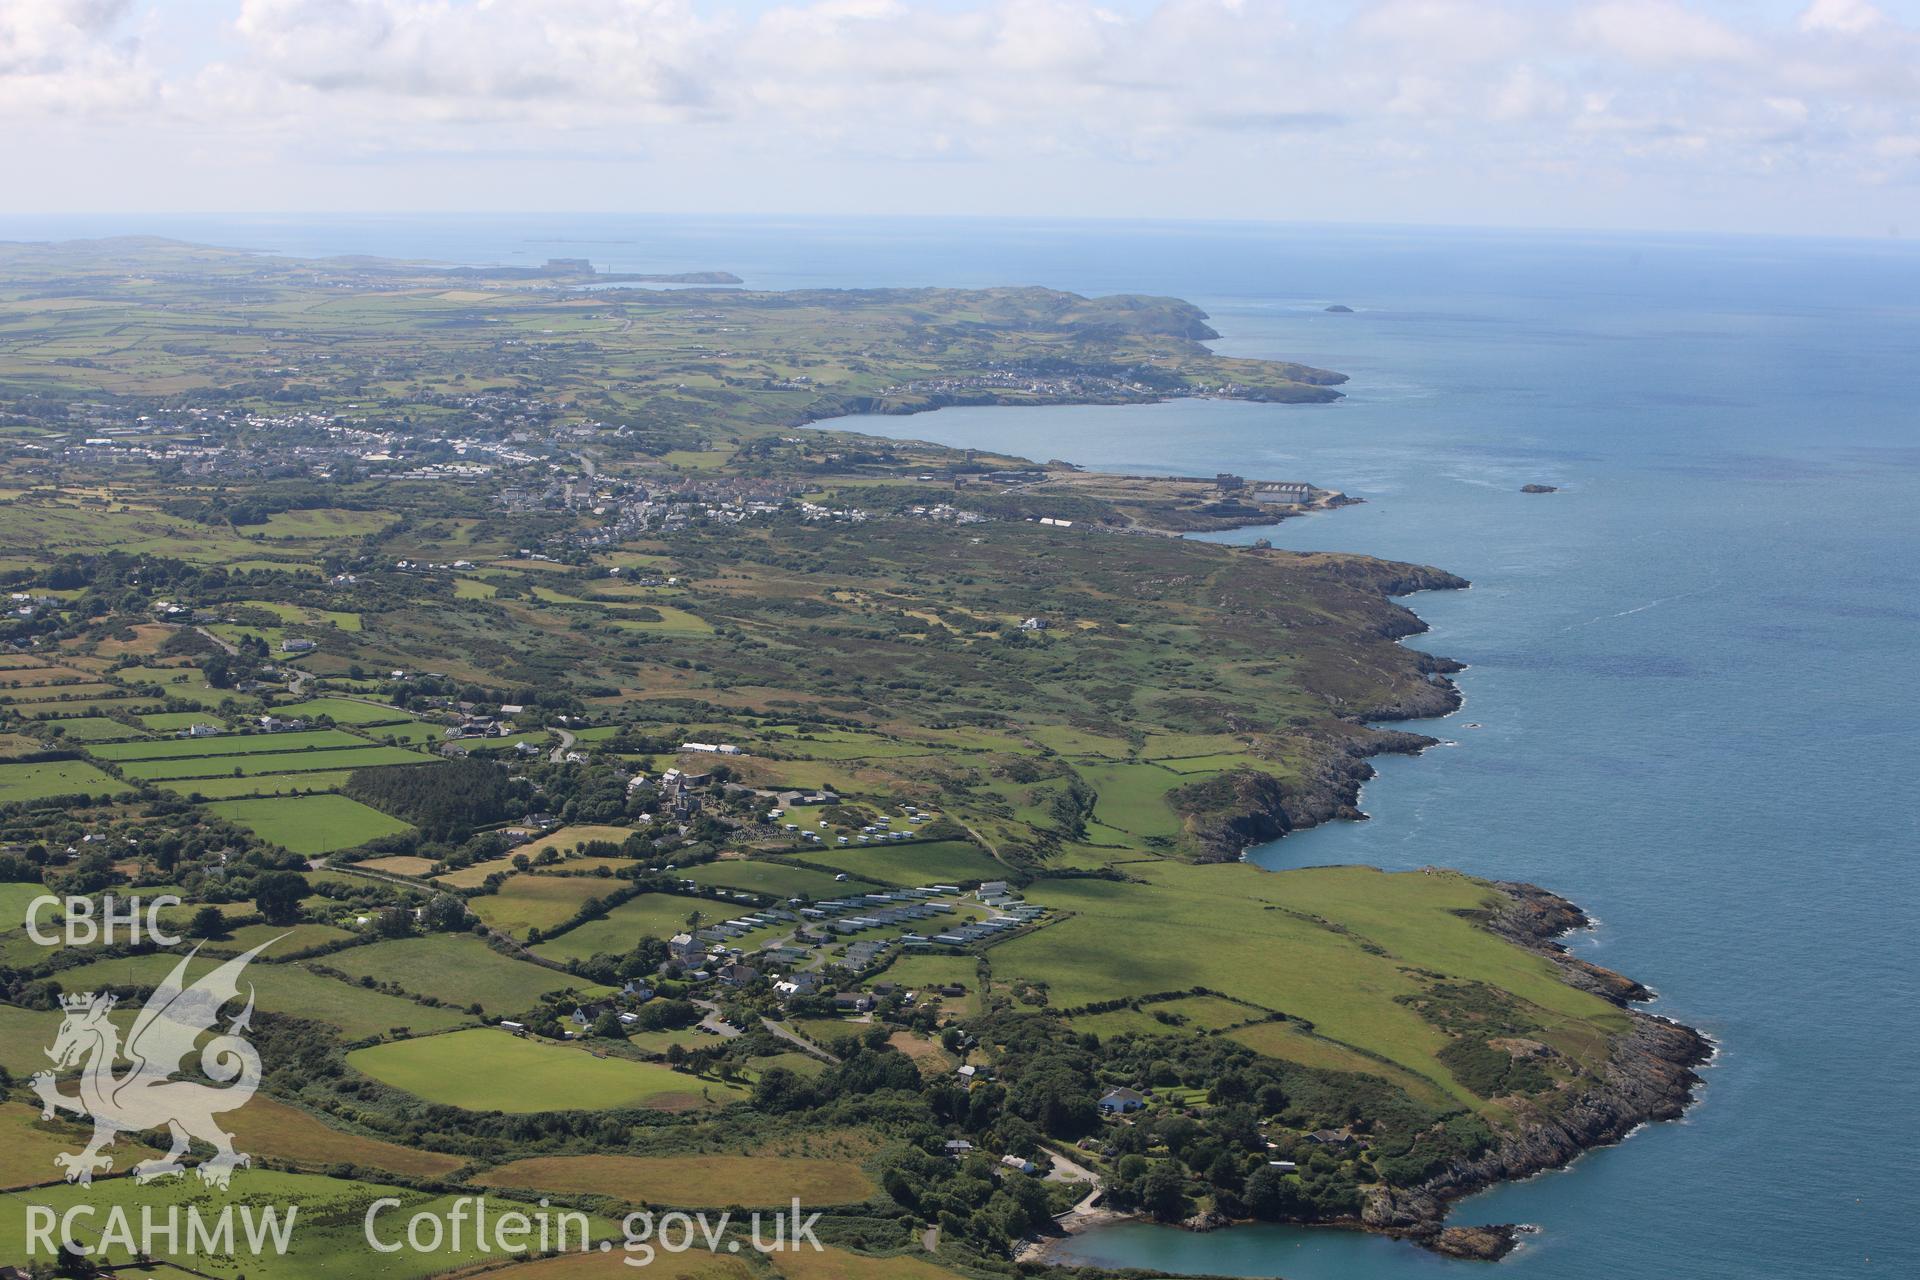 RCAHMW colour oblique photograph of Porth Amlwch, view from east over Llaneilian. Taken by Toby Driver on 20/07/2011.